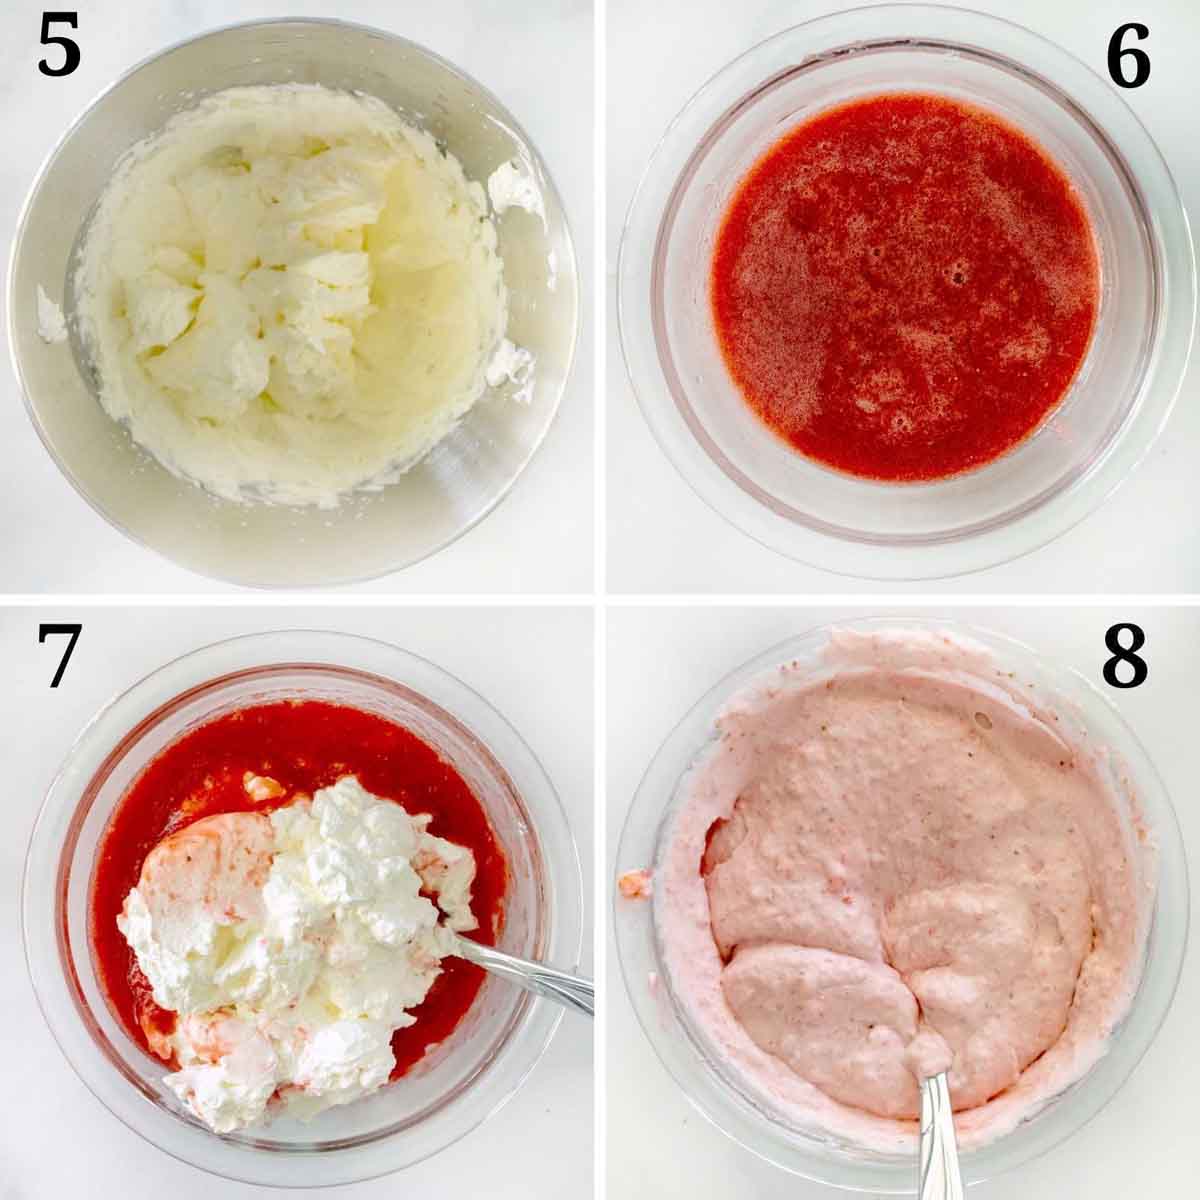 four images showing how to finish making strawberry mousse